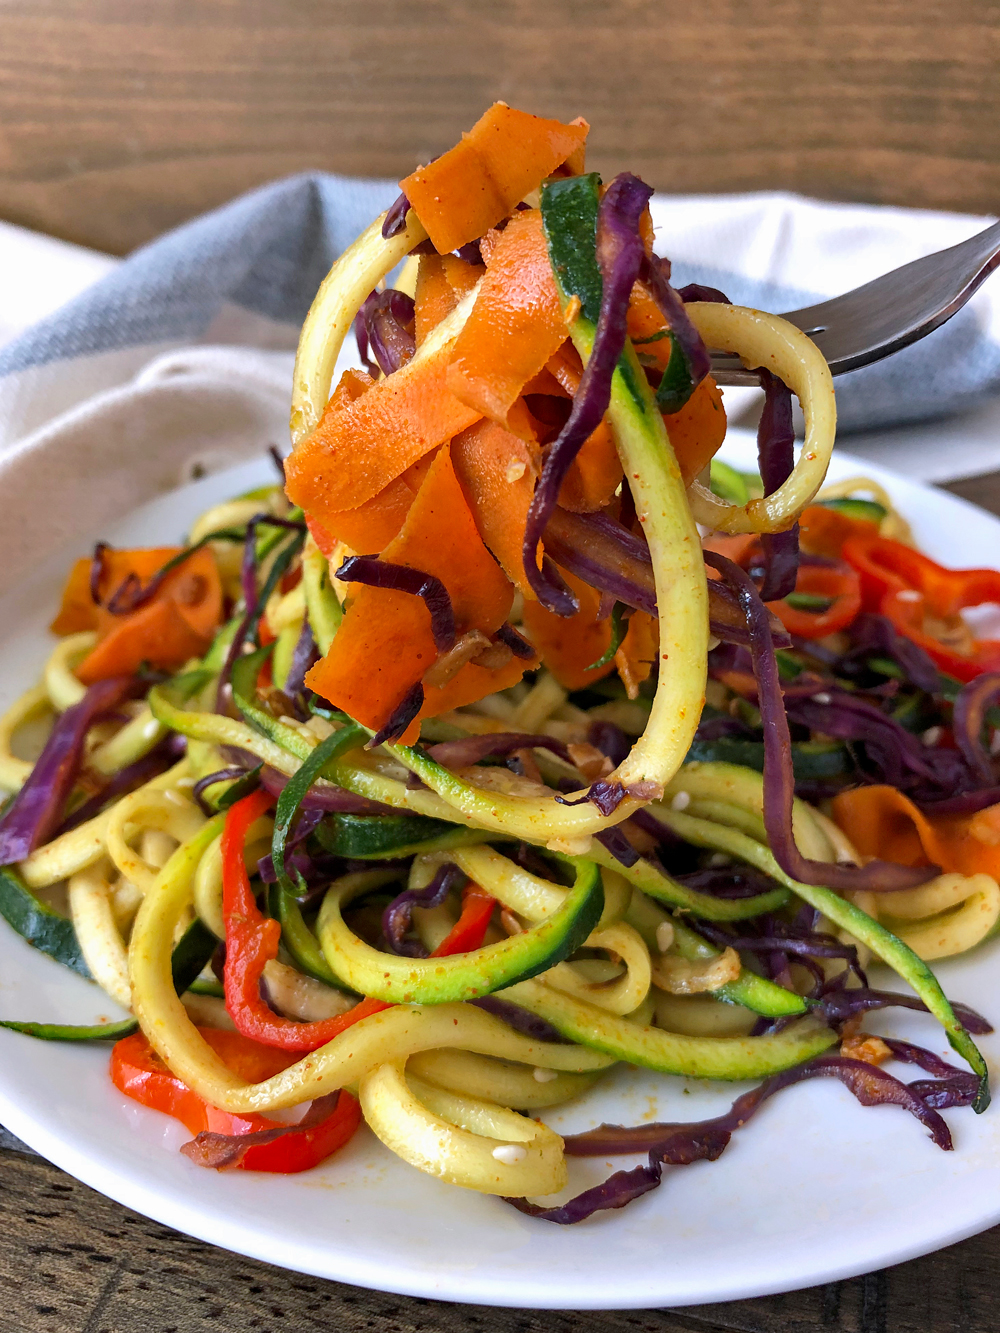 Carrot and zucchini noodles